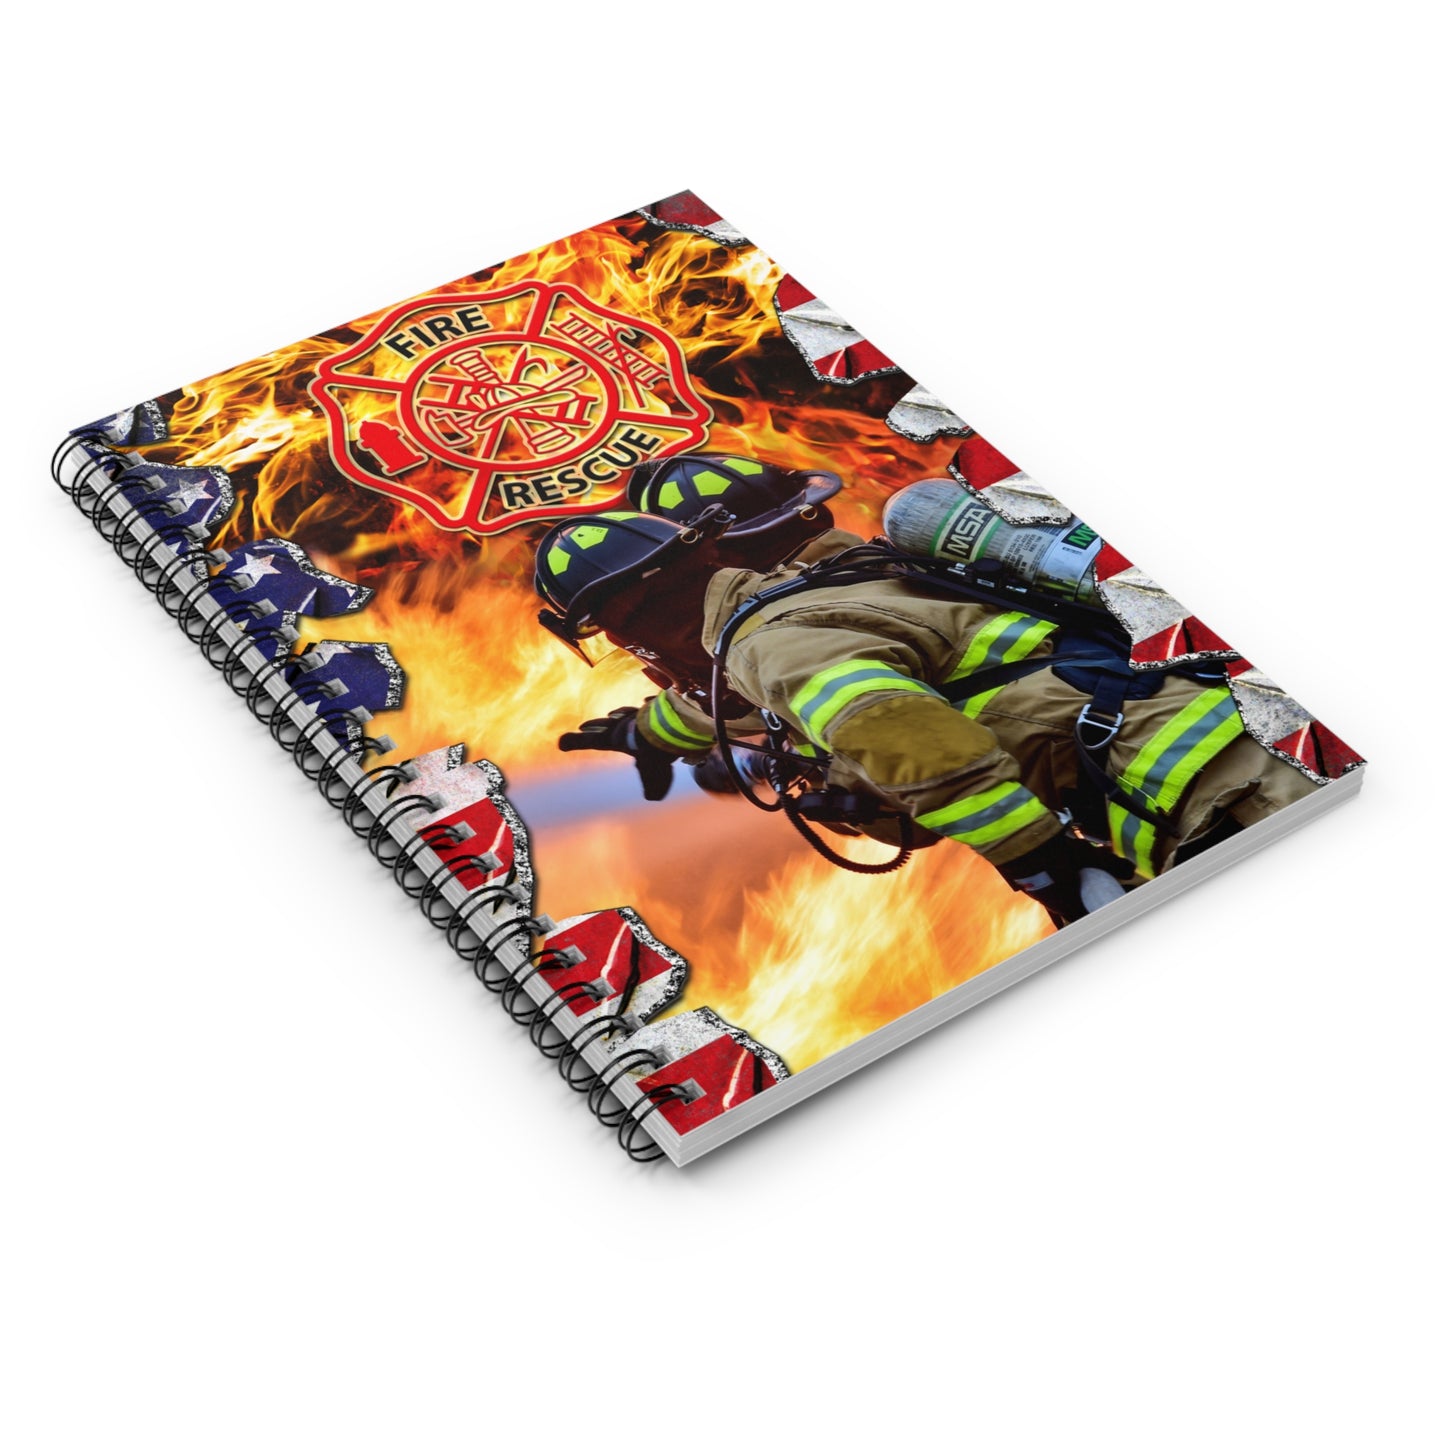 Fire Rescue Spiral Notebook - Ruled Line